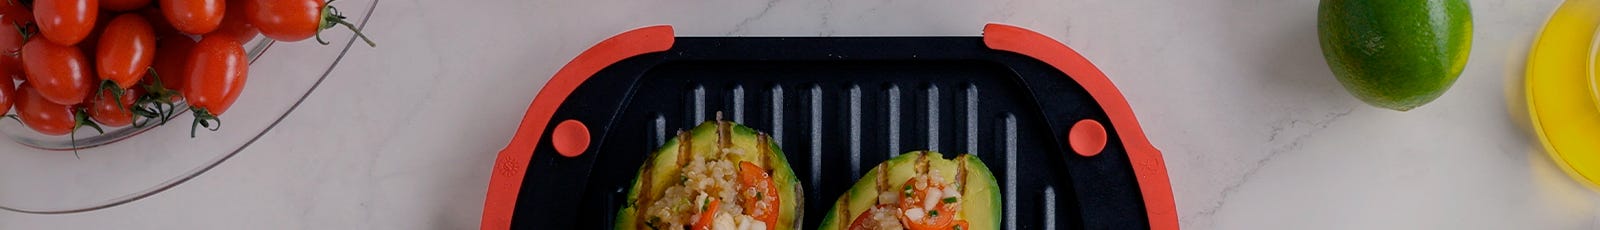 Microwave Grill Recipes